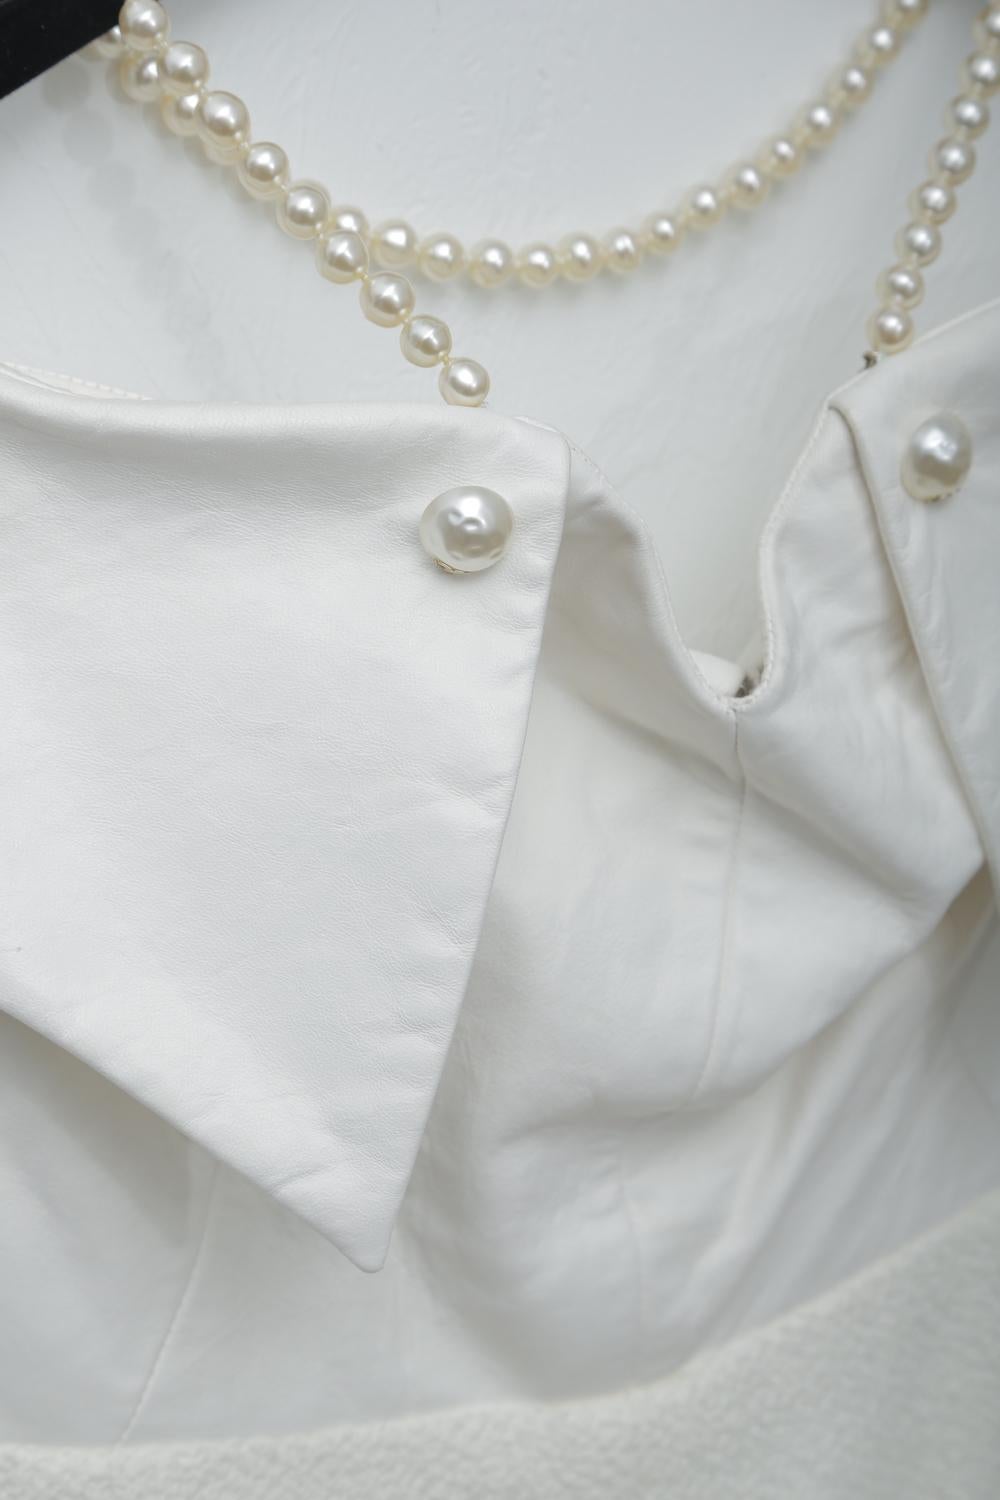 Superb Chanel White Tweet Dress with Pearls with Matching Crop Jacket  1